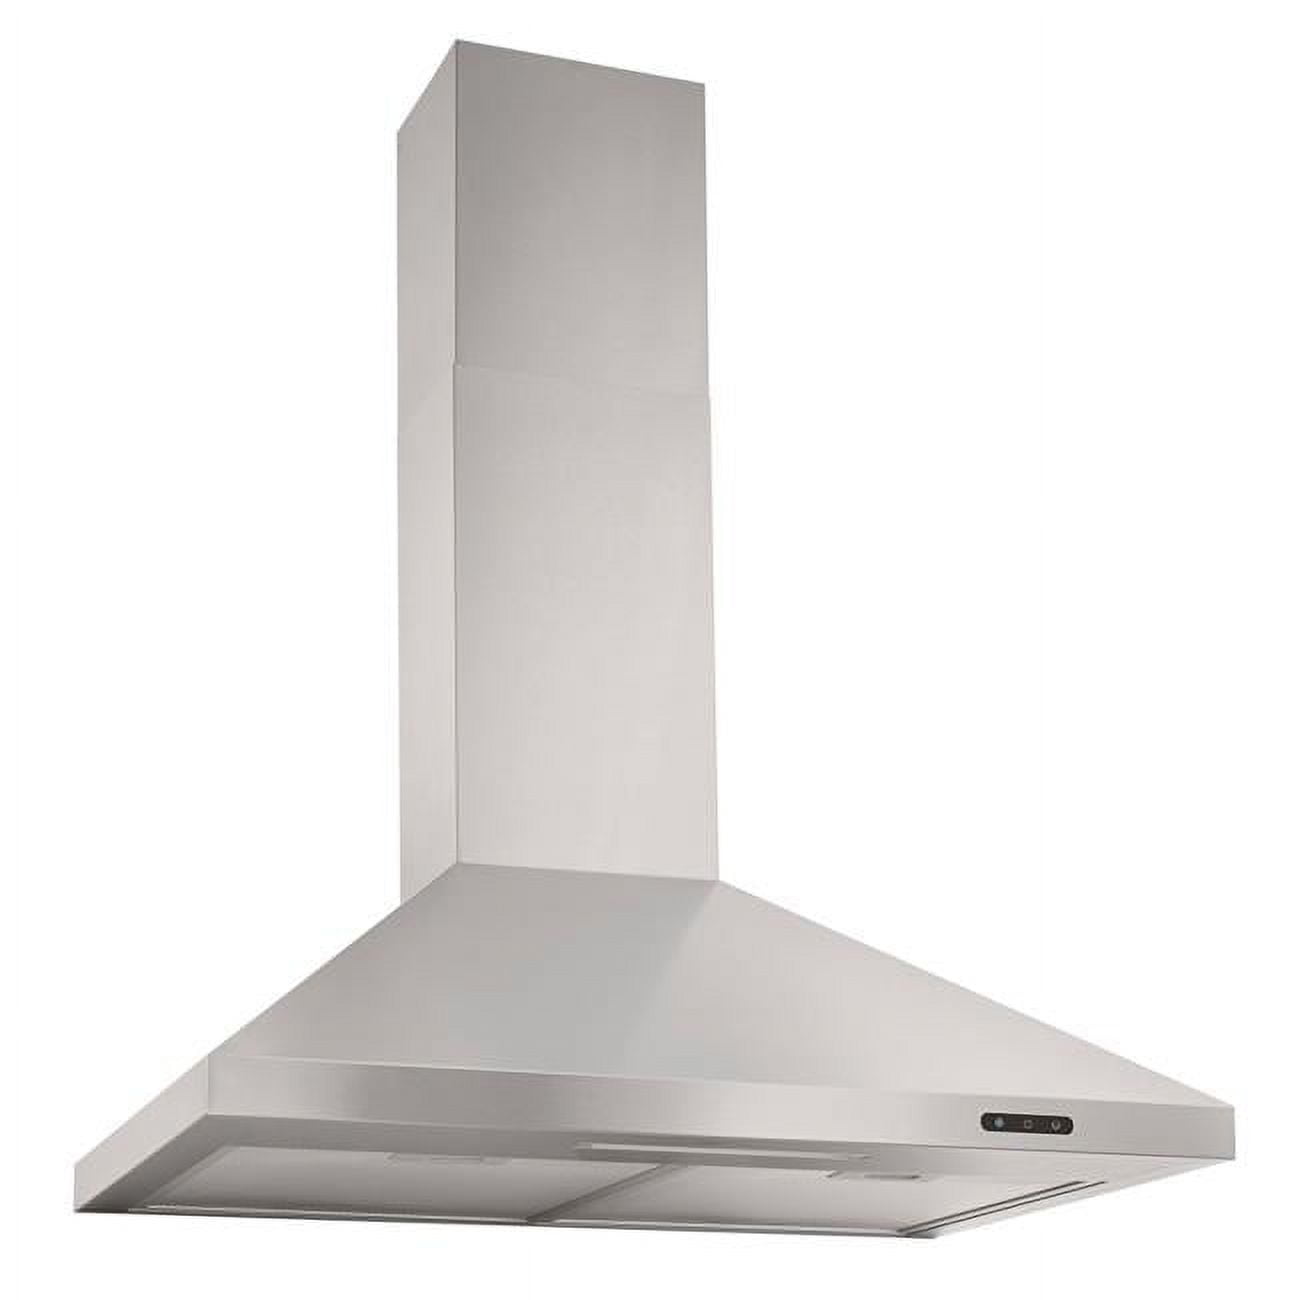 30" Stainless Steel Wall Mount Range Hood with LED